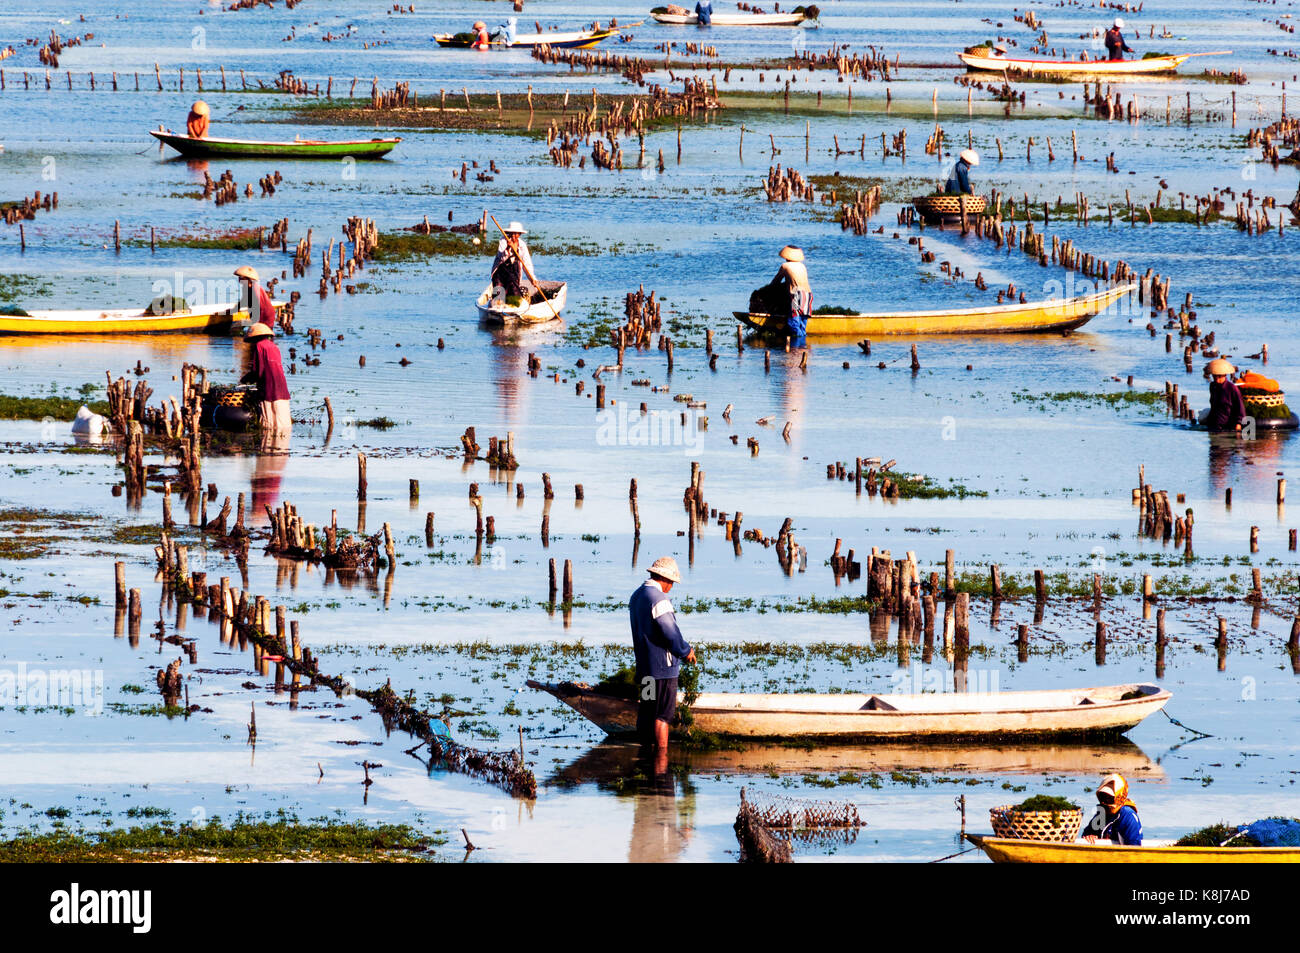 Indonesia. Bali. Nusa Lembongan island. The people of the island have specialized in the cultivation of algae. Farmer harvesting algae Stock Photo